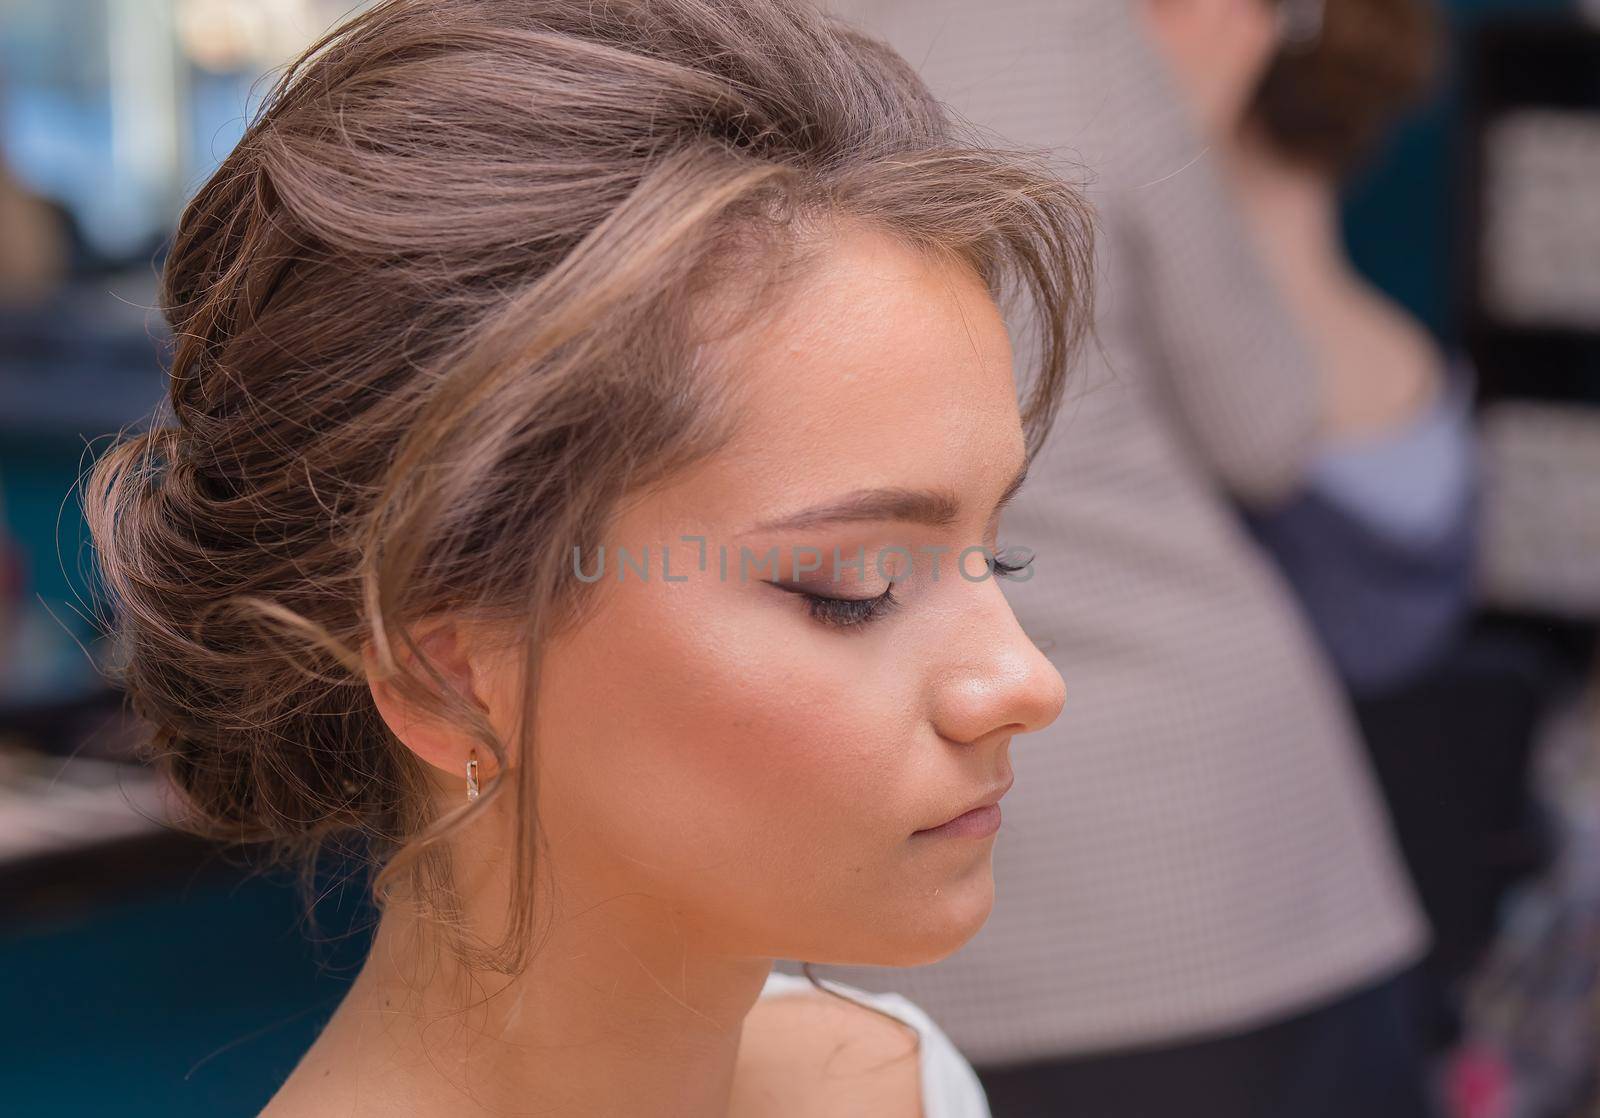 Girl's face with closed eyes, fashionable make-up and hairstyle. Female master makes makeup to a young woman. Business concept - beauty salon, facial skin care, cosmetology.